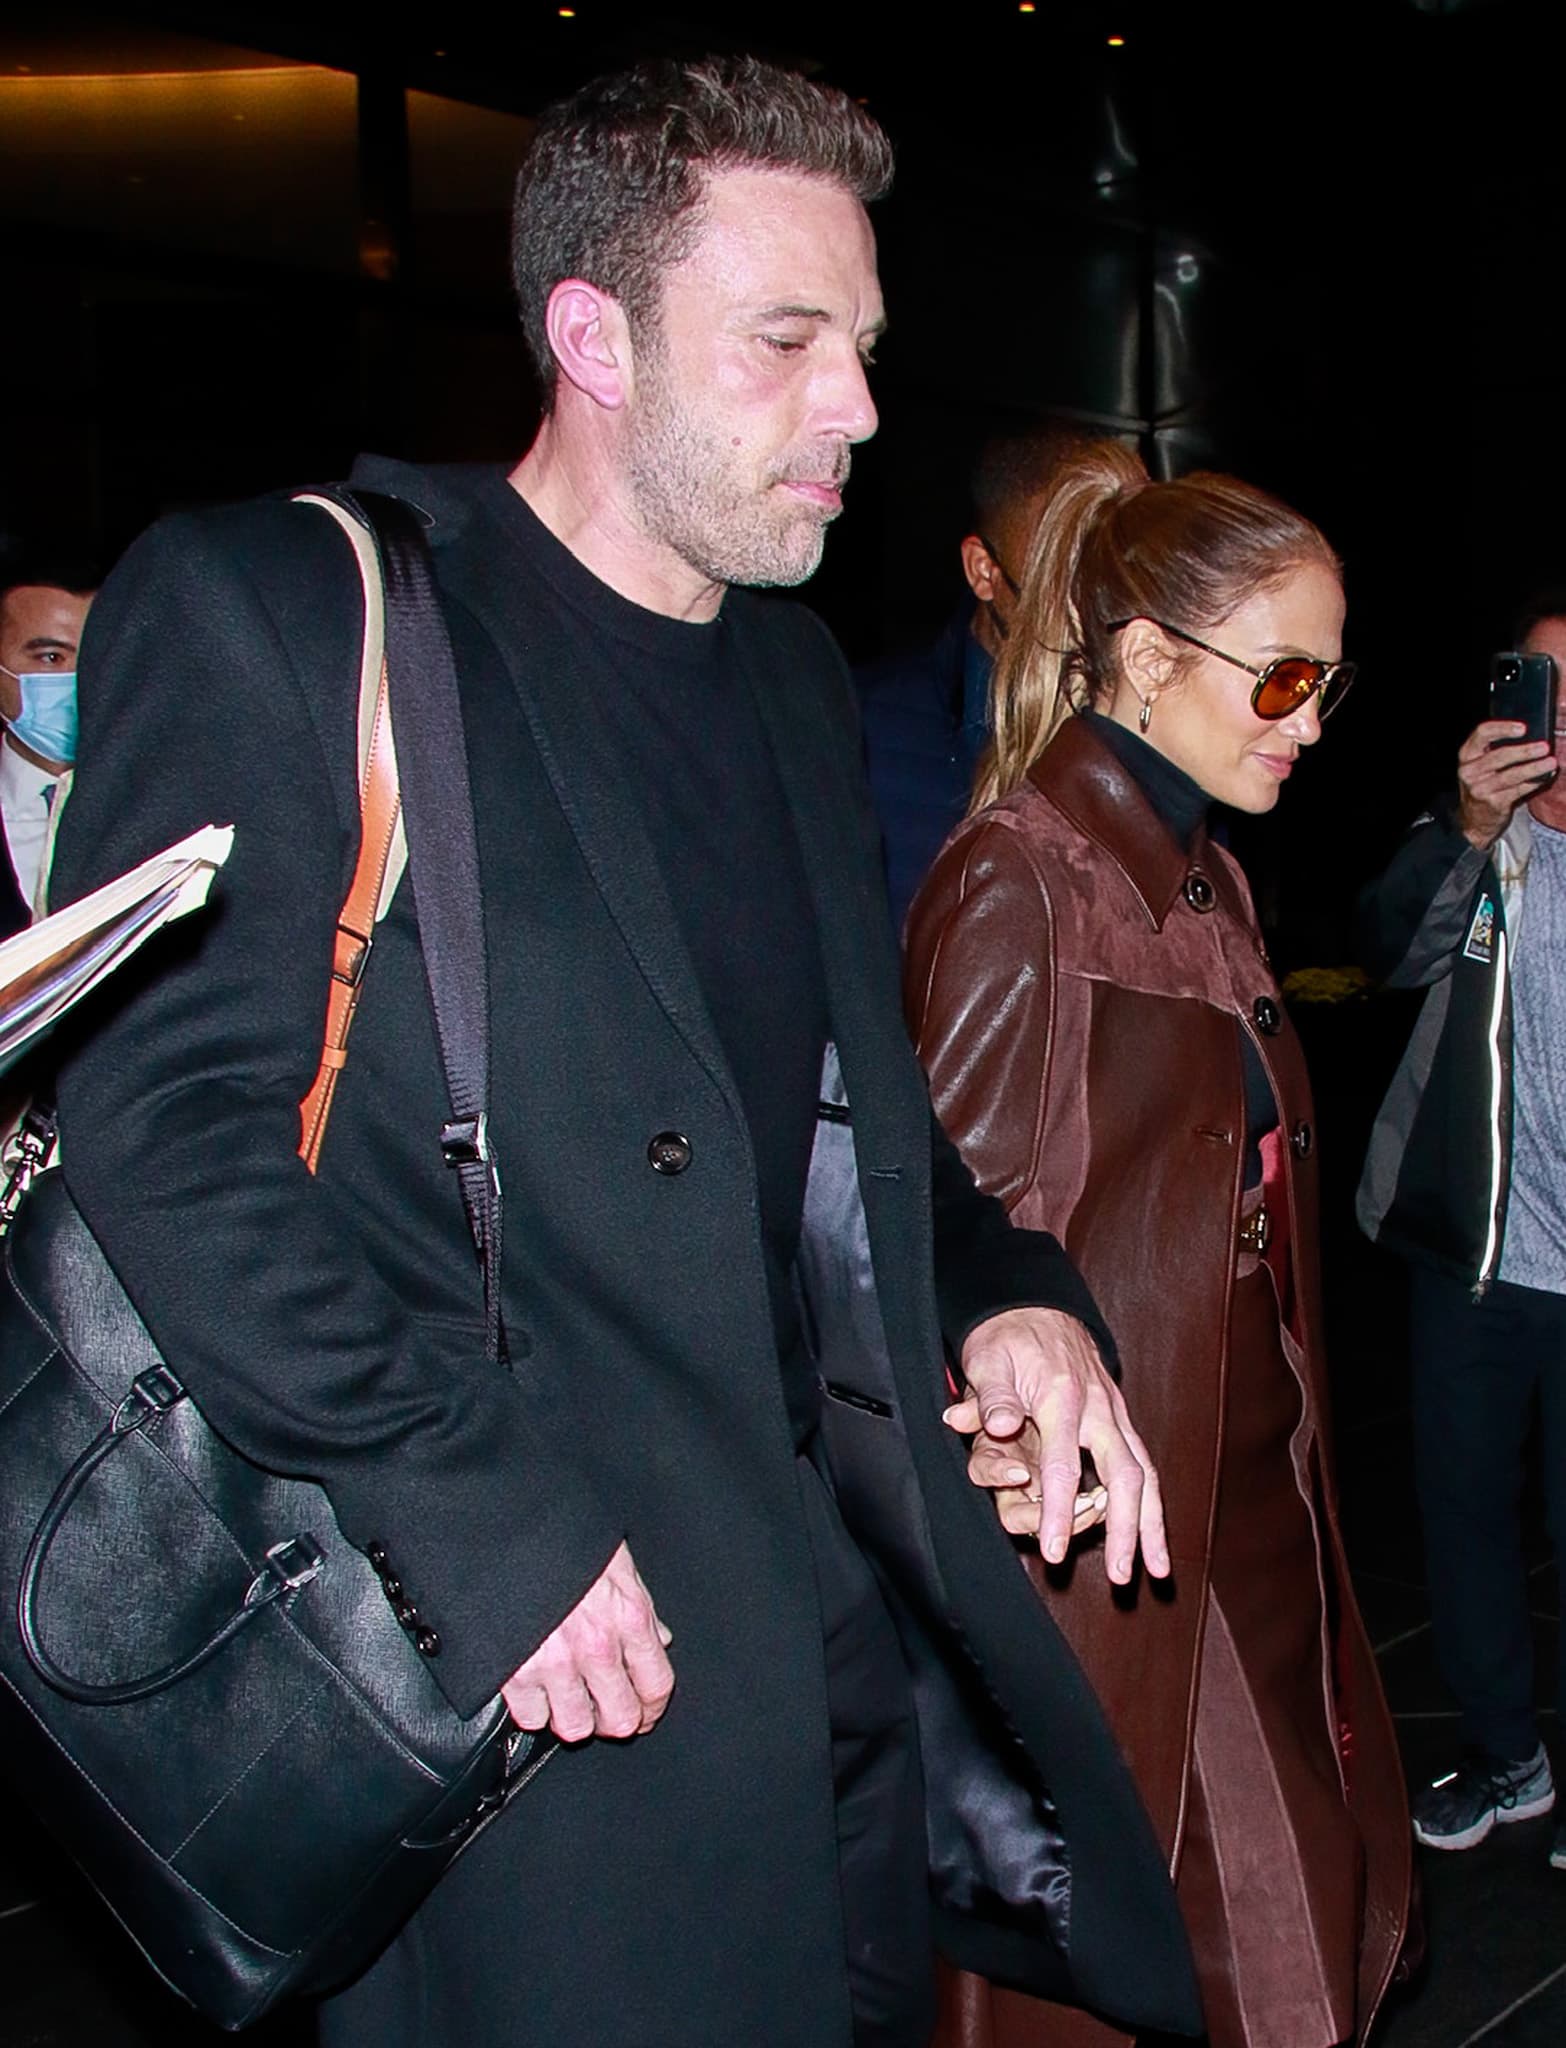 Jennifer Lopez looks beautiful with minimal makeup and with her hair tied into a high ponytail